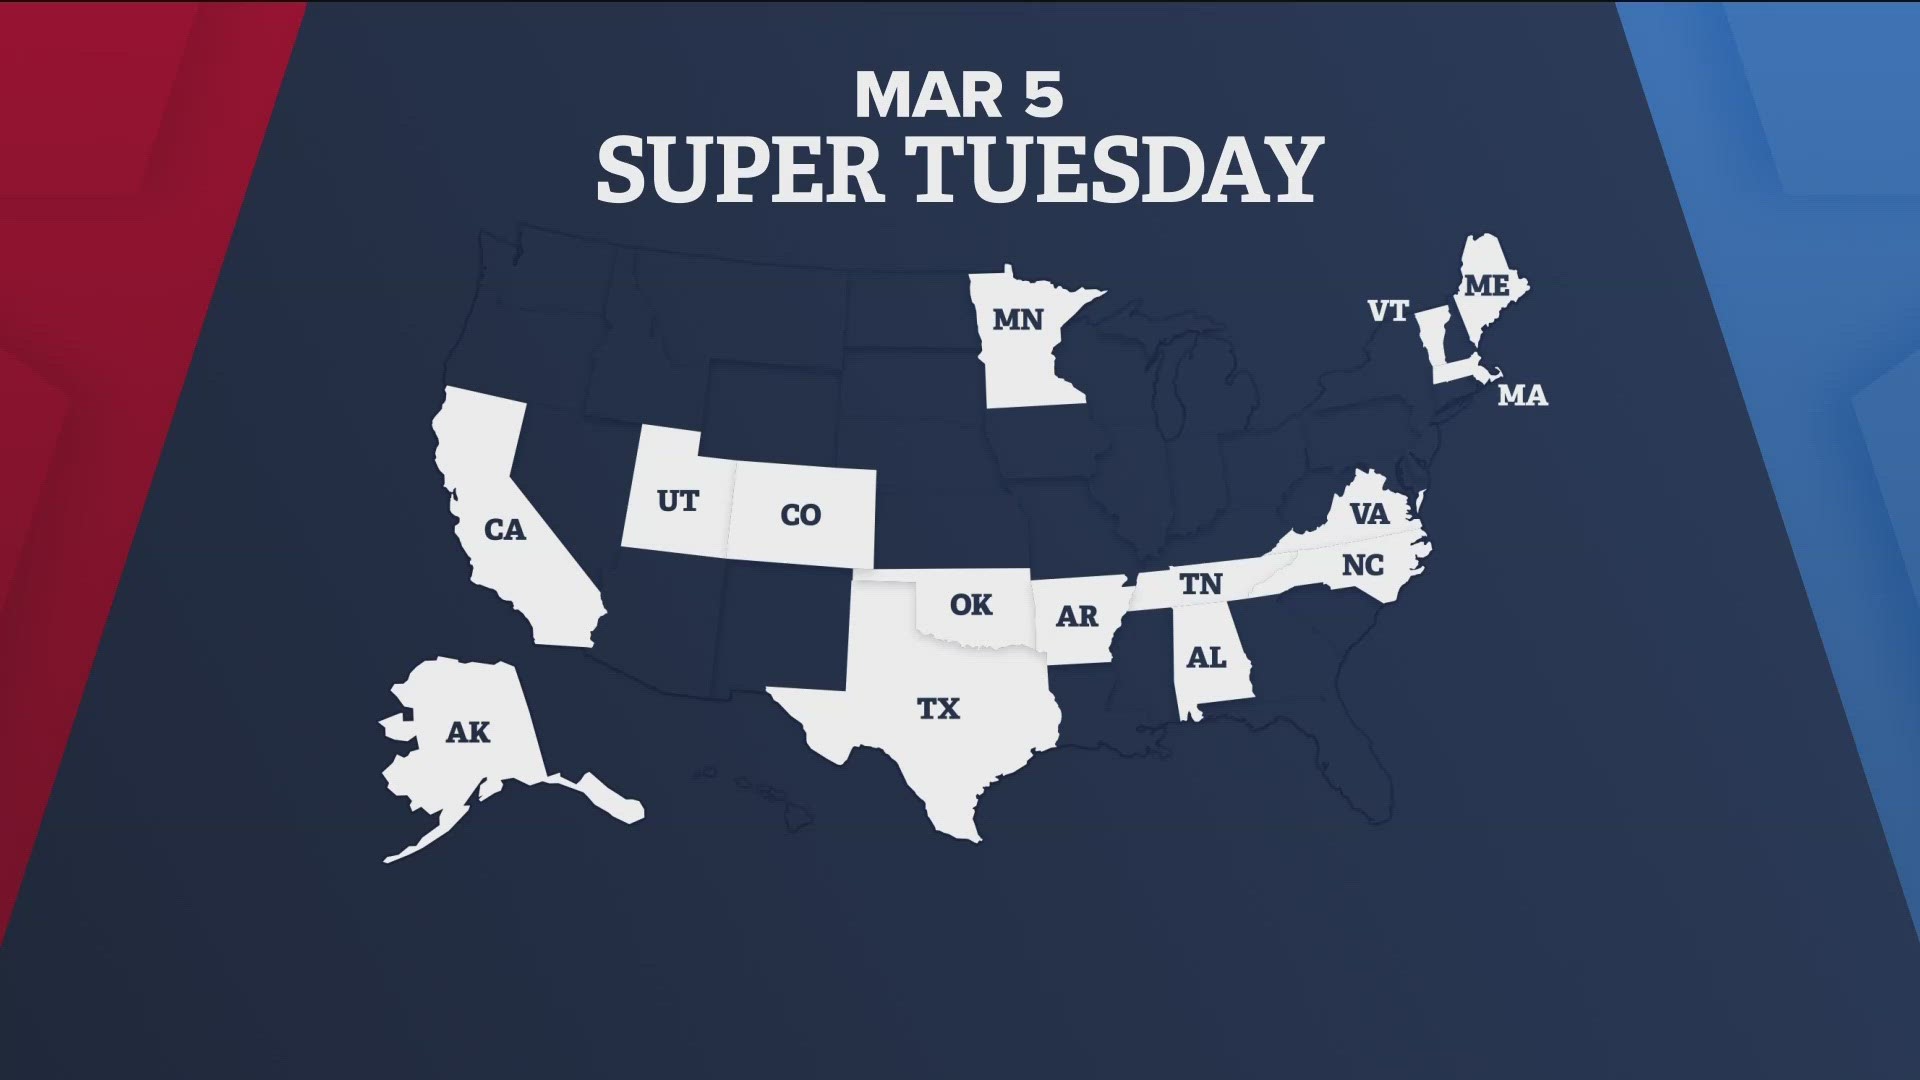 Hundreds of delegates are at stake on Super Tuesday, the biggest haul for either party on any single day.